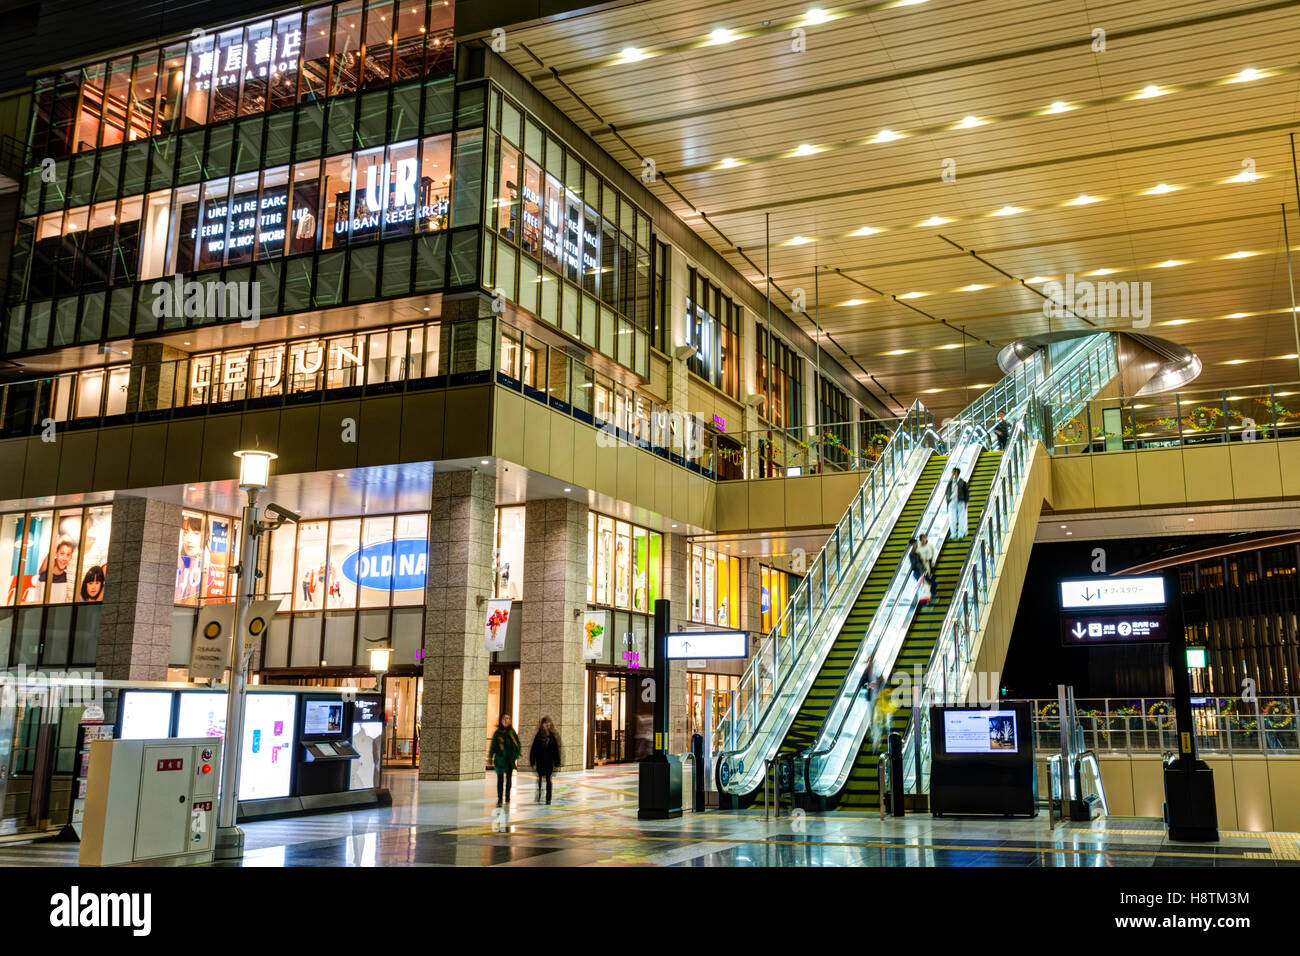 Japan, Osaka Station City interior. North Gate Building entrance area with Lucua store, stairs and escalators to next level. Night time. People. Stock Photo